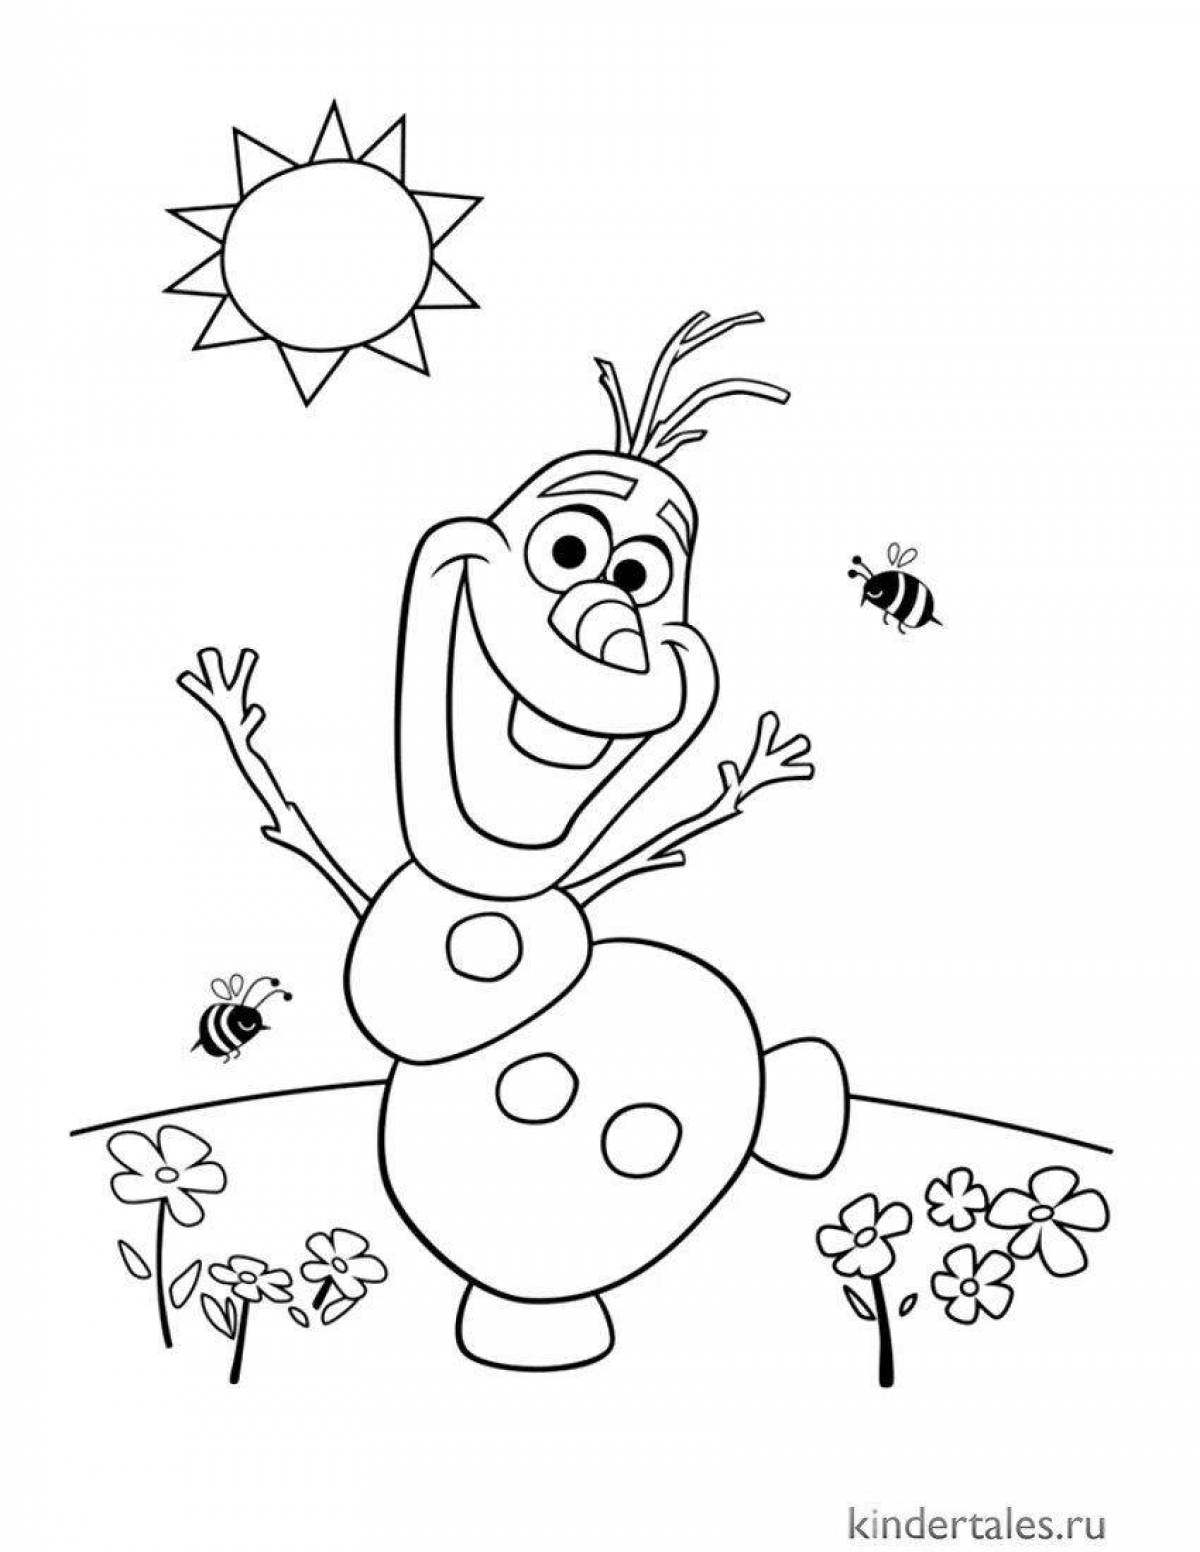 Olaf's nice coloring book for kids